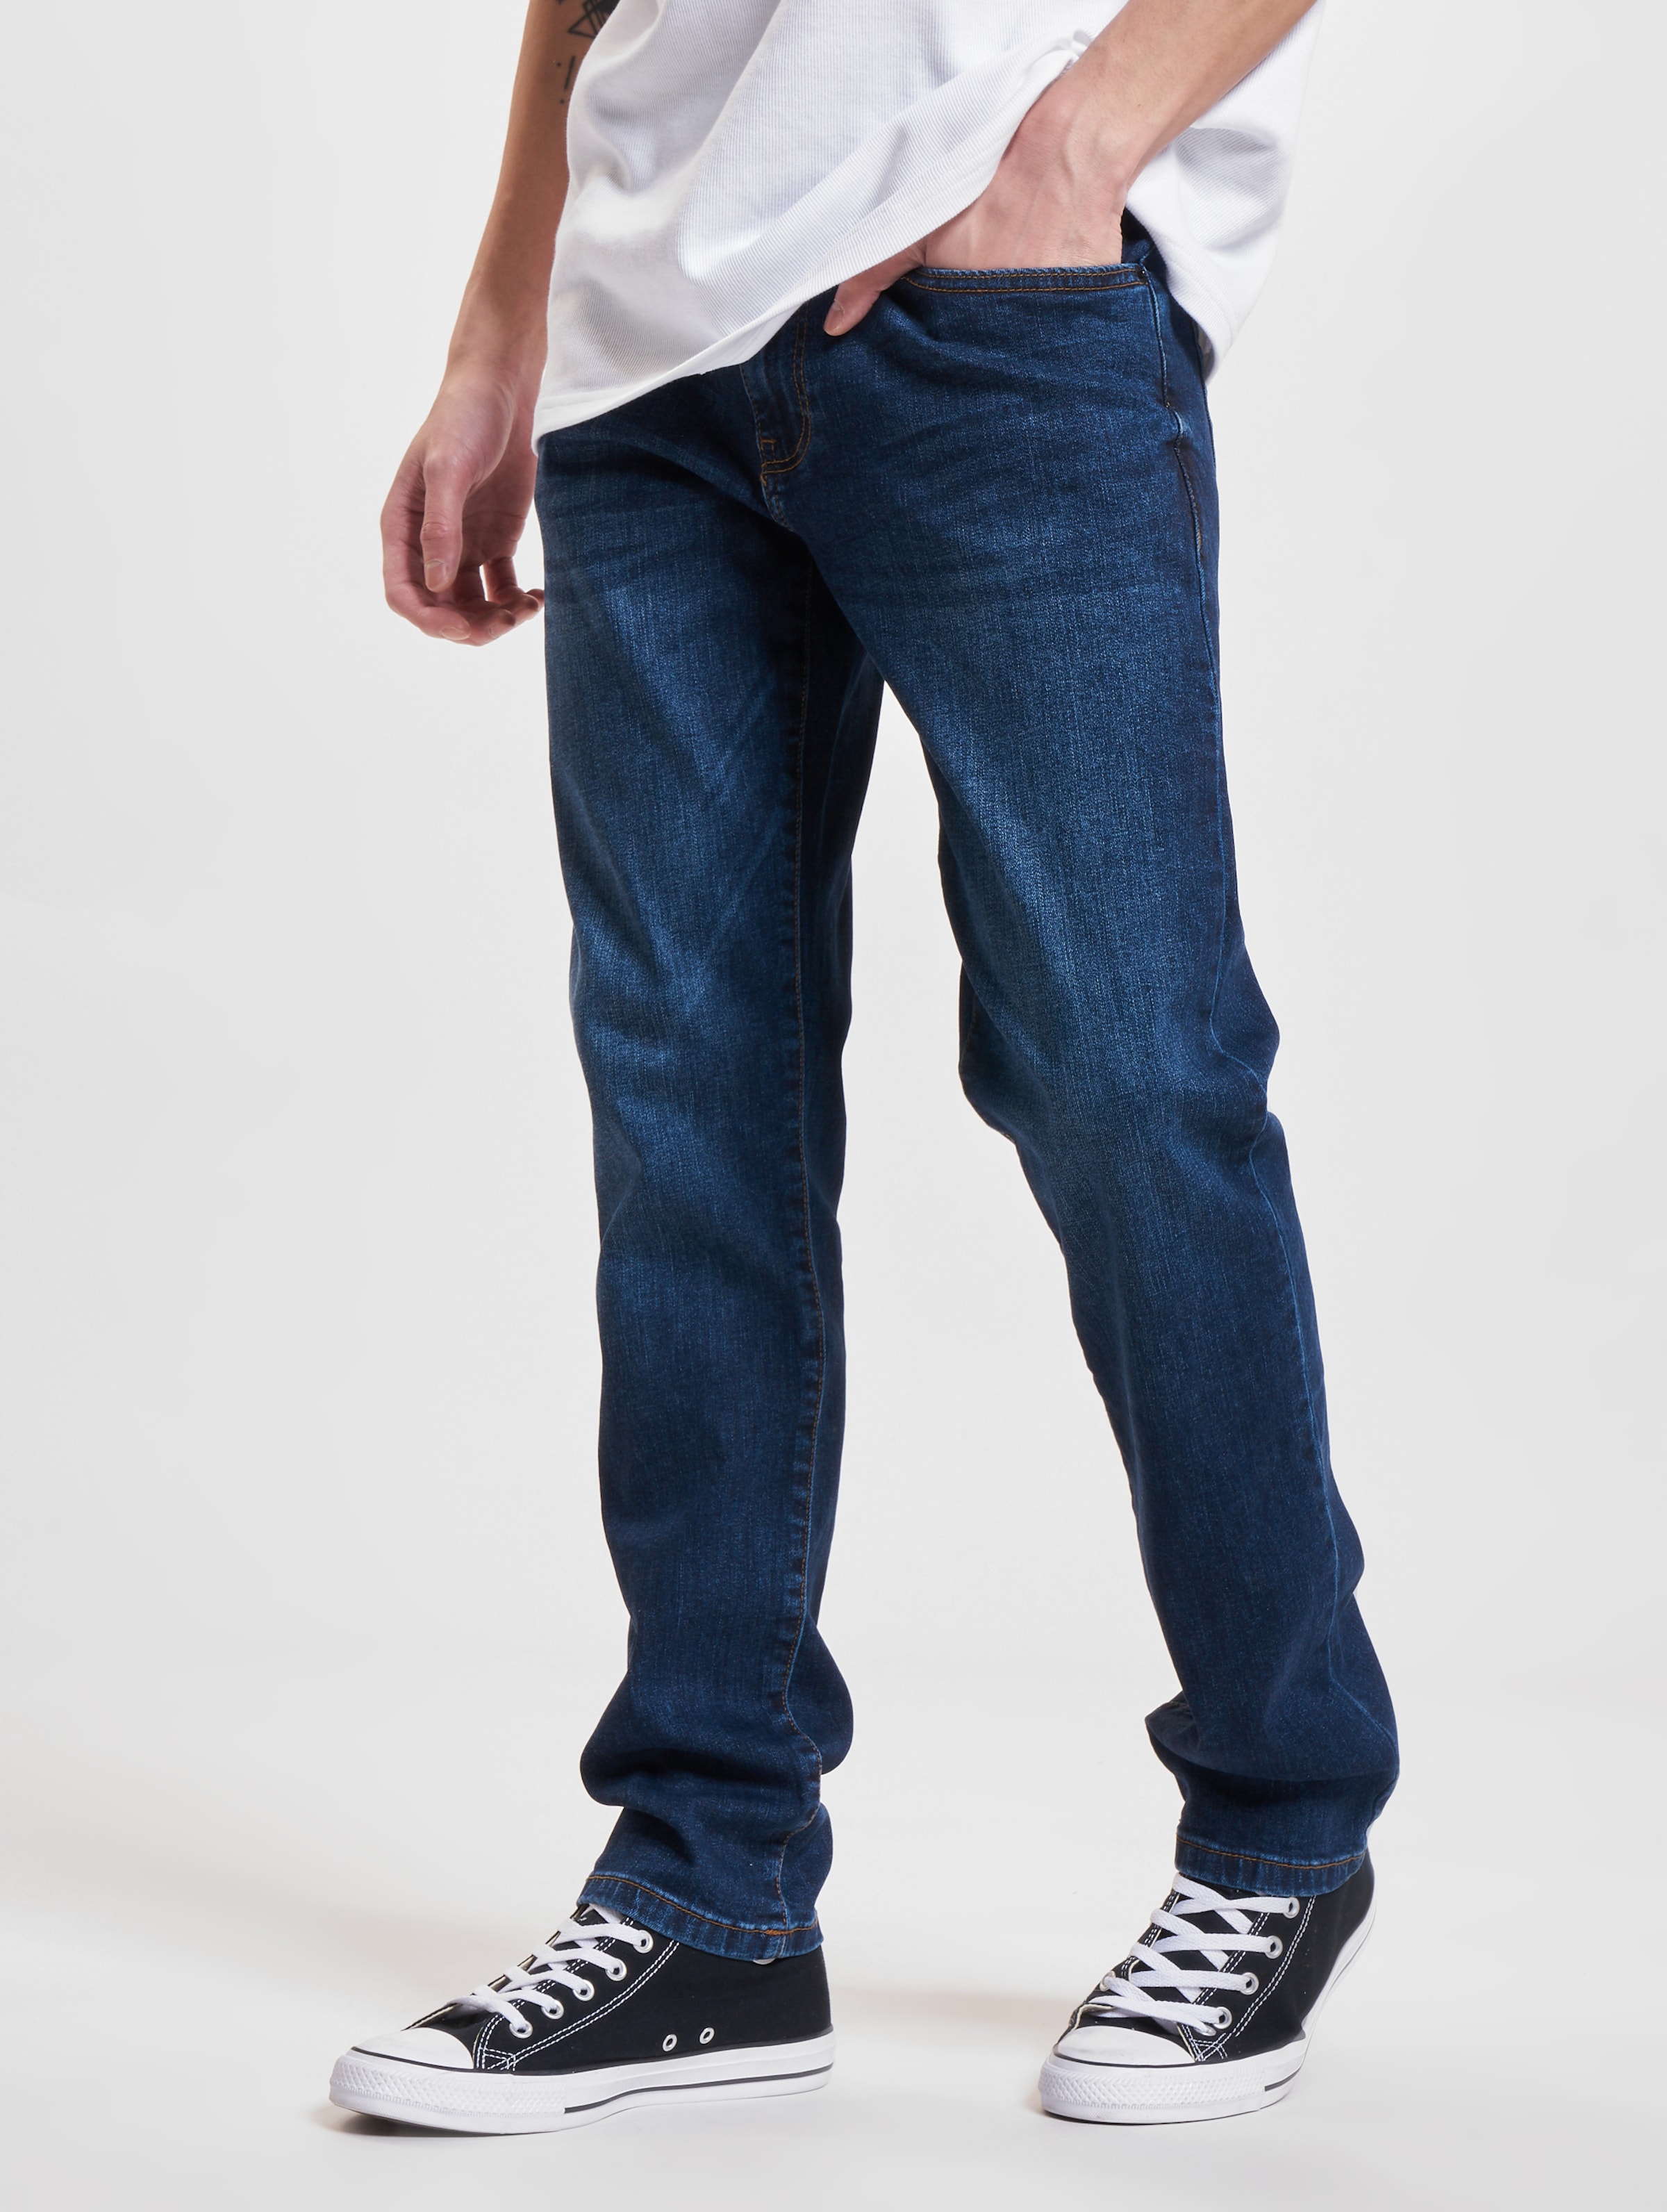 ONLY & SONS ONSWEFT REG.DK. BLUE 6752 DNM JEANS NOOS Heren Jeans - Maat W31 X L34